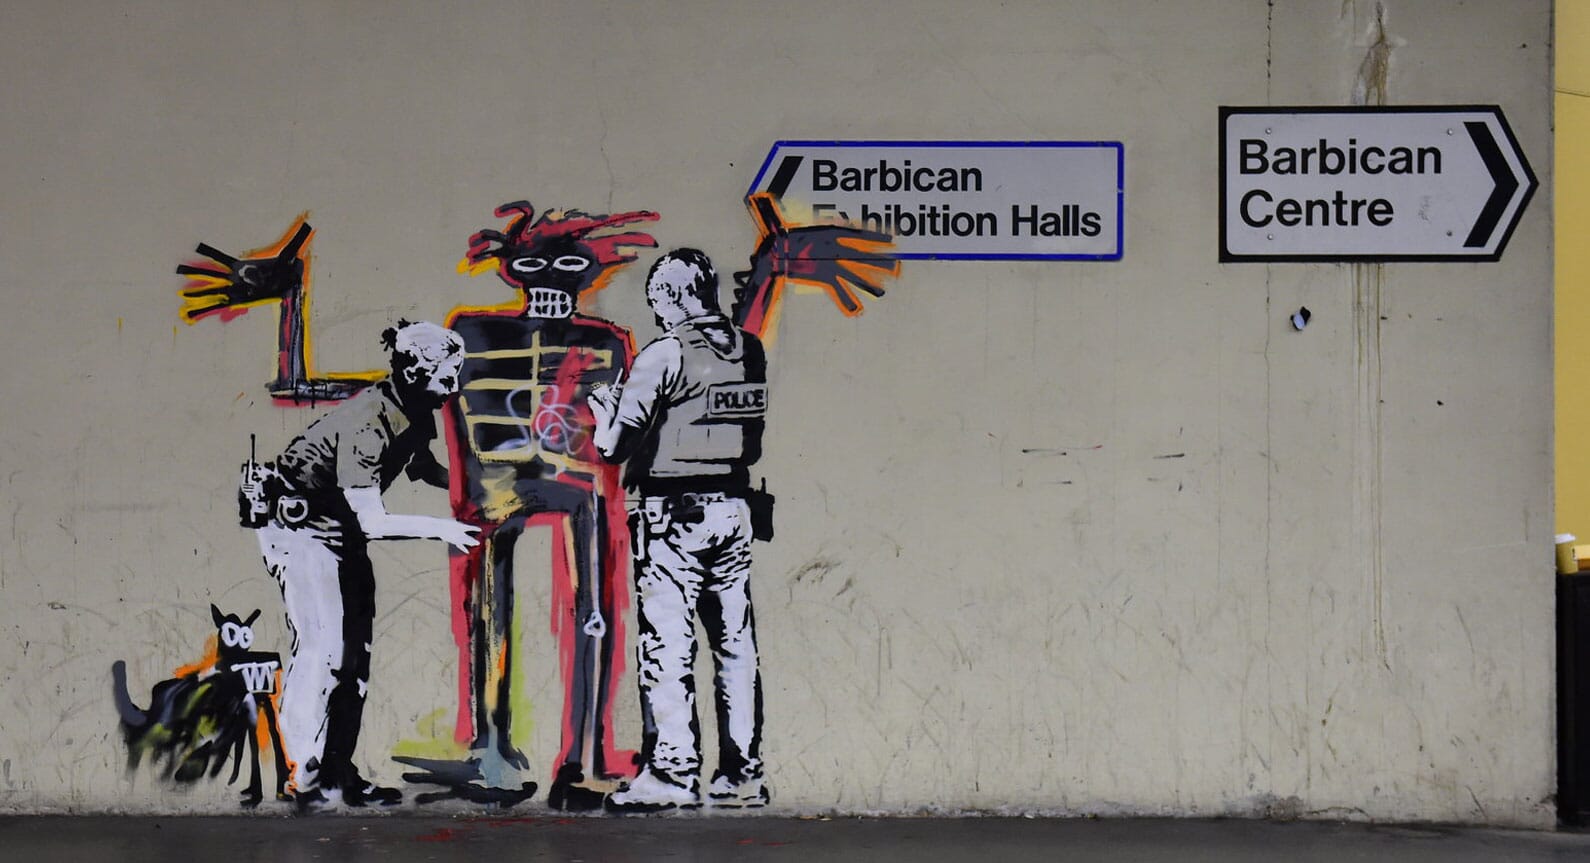 Banksy Strikes Again With Two New Murals That Pay Tribute to Basquiat at the Barbican